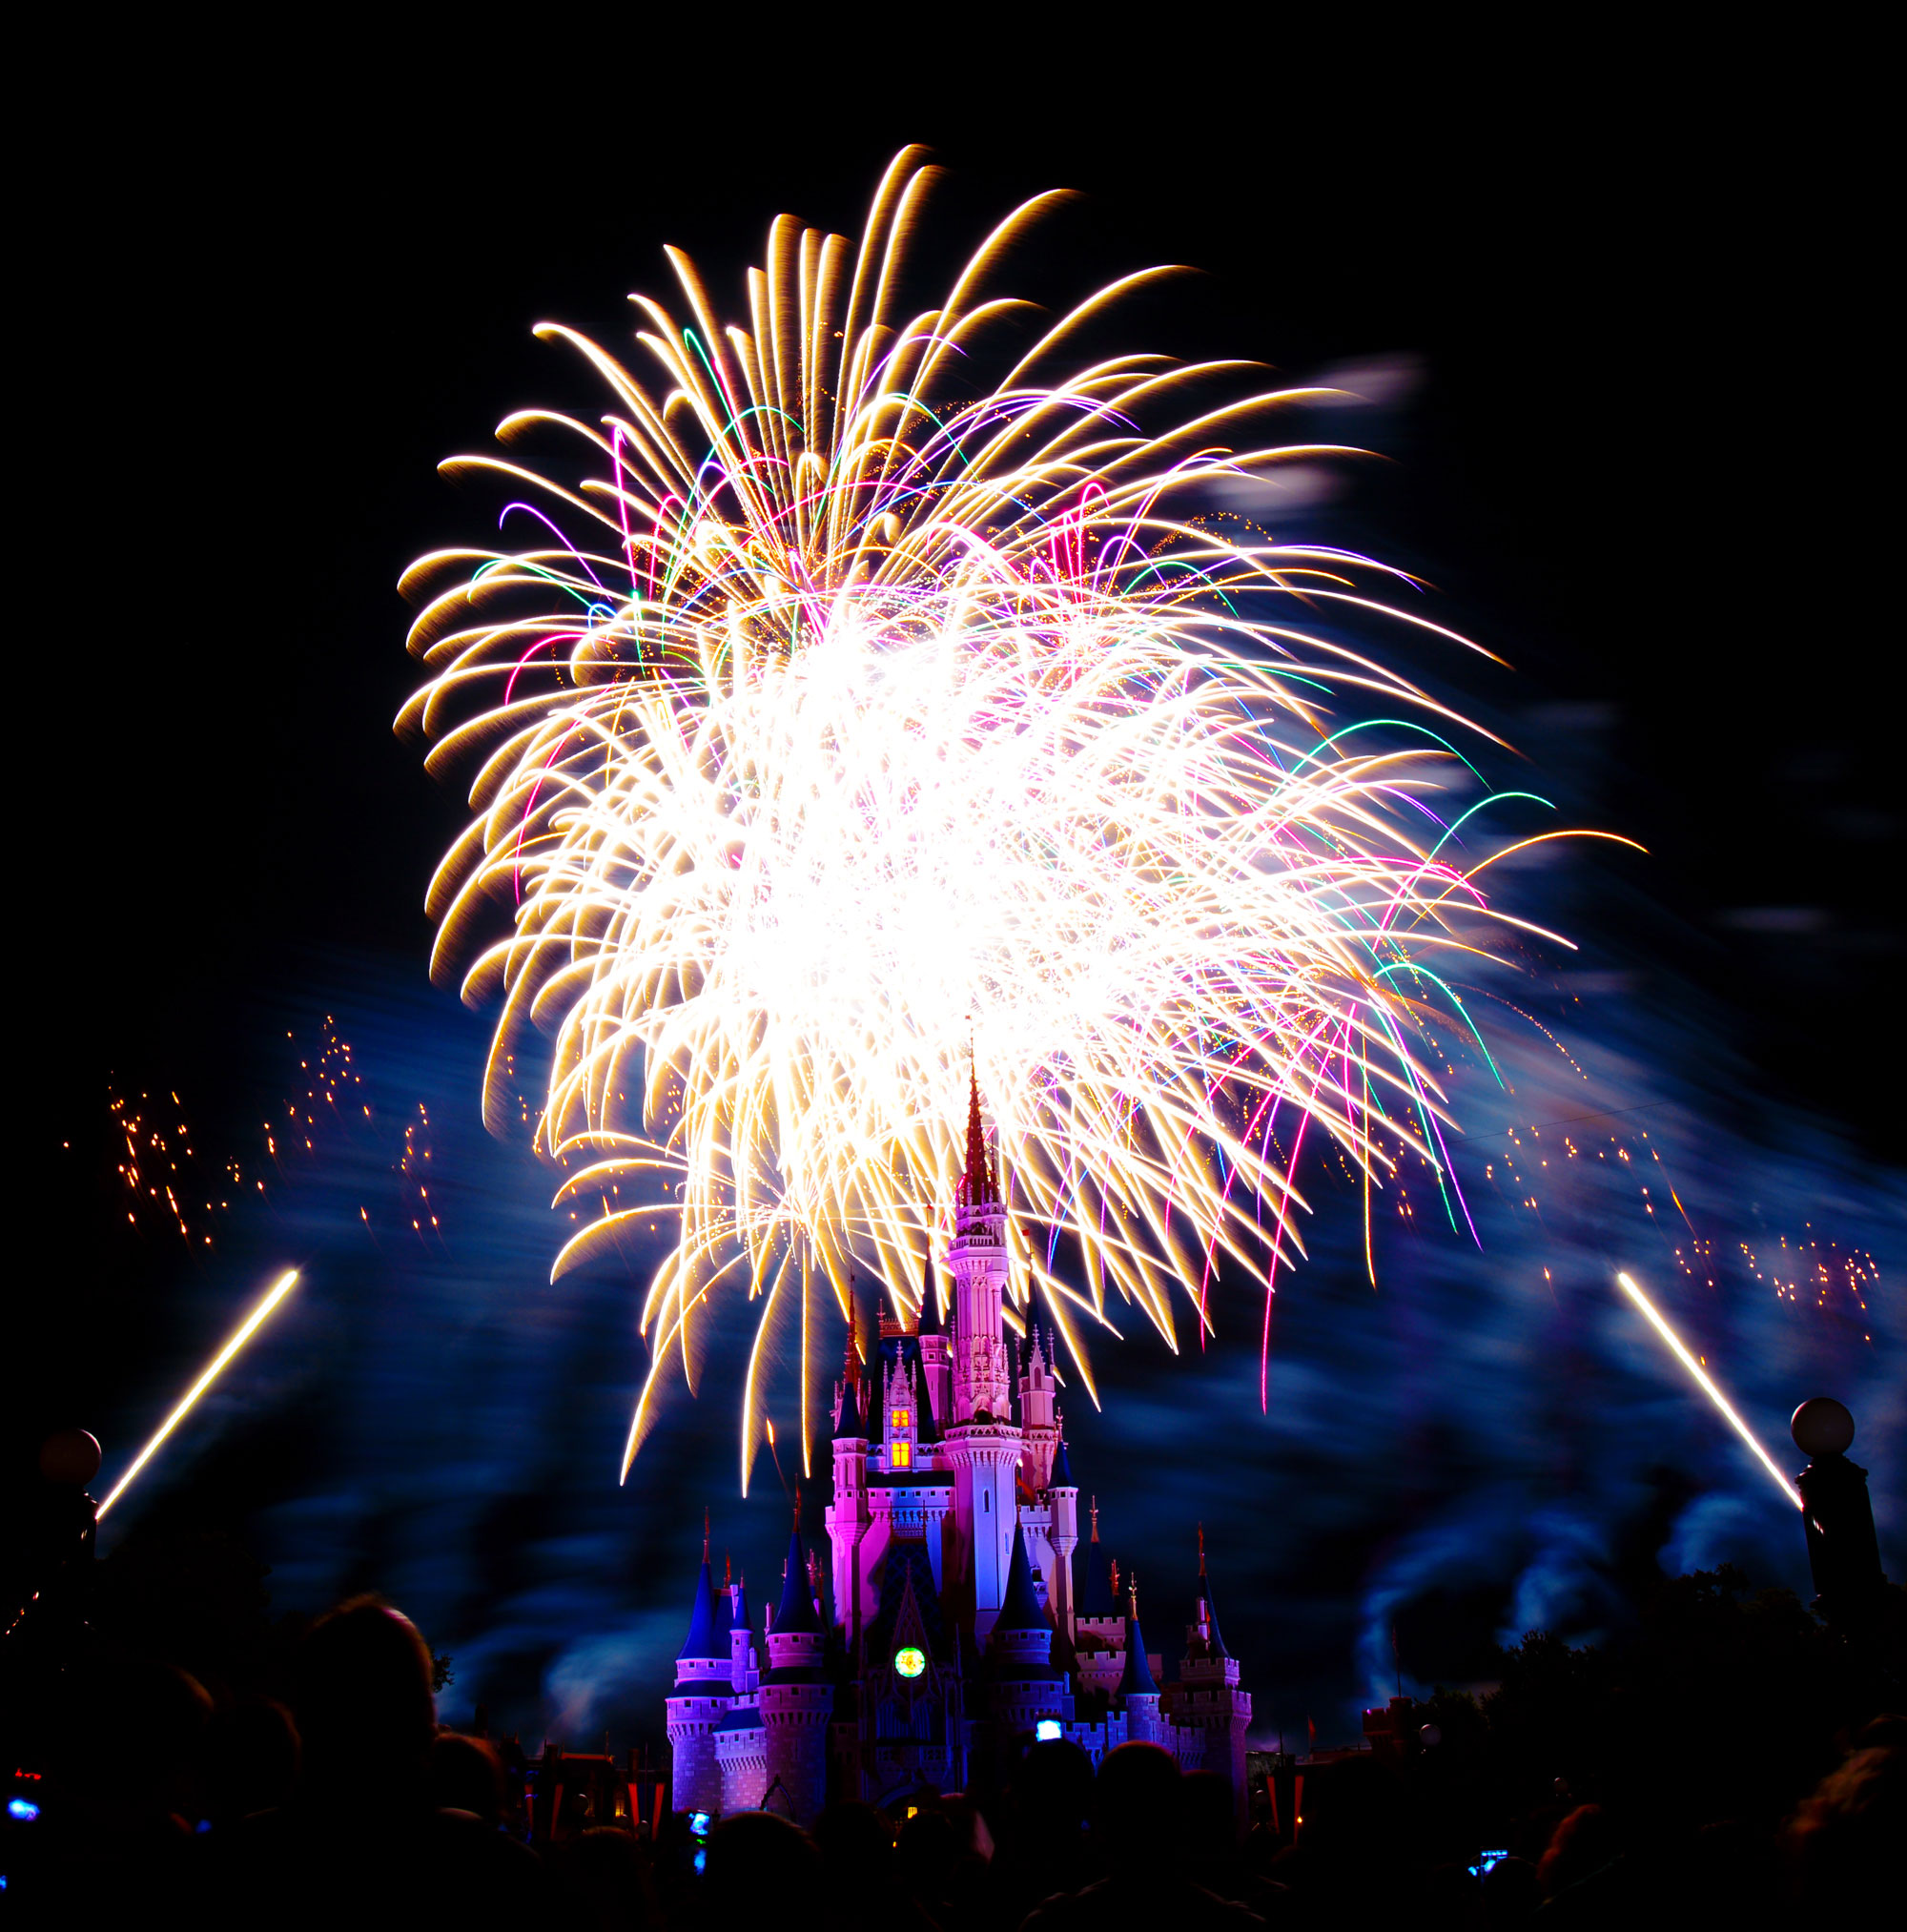 Wishes Fireworks at the Magic Kingdom in Disney World August 2014